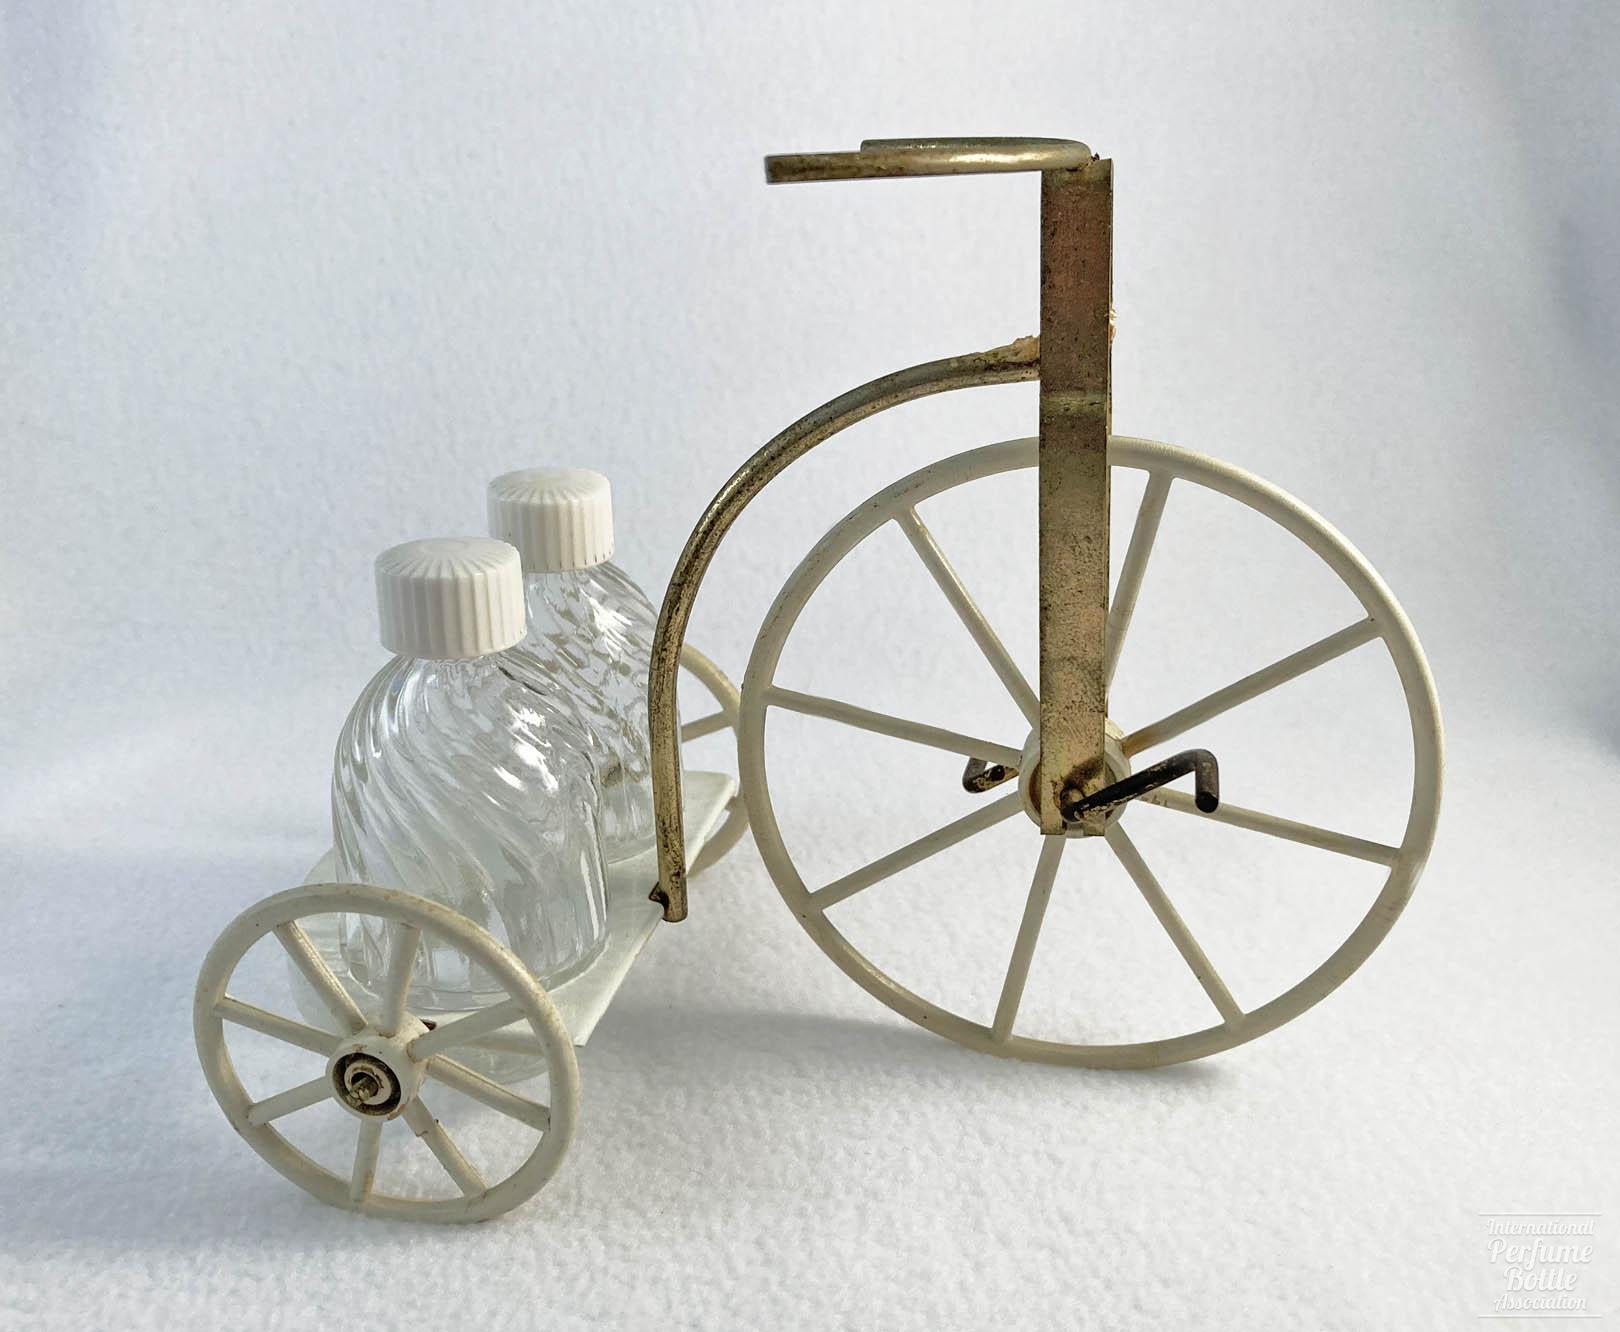 Metal Tricycle With Two Mini Perfumes, Rubicon Distr. Co.